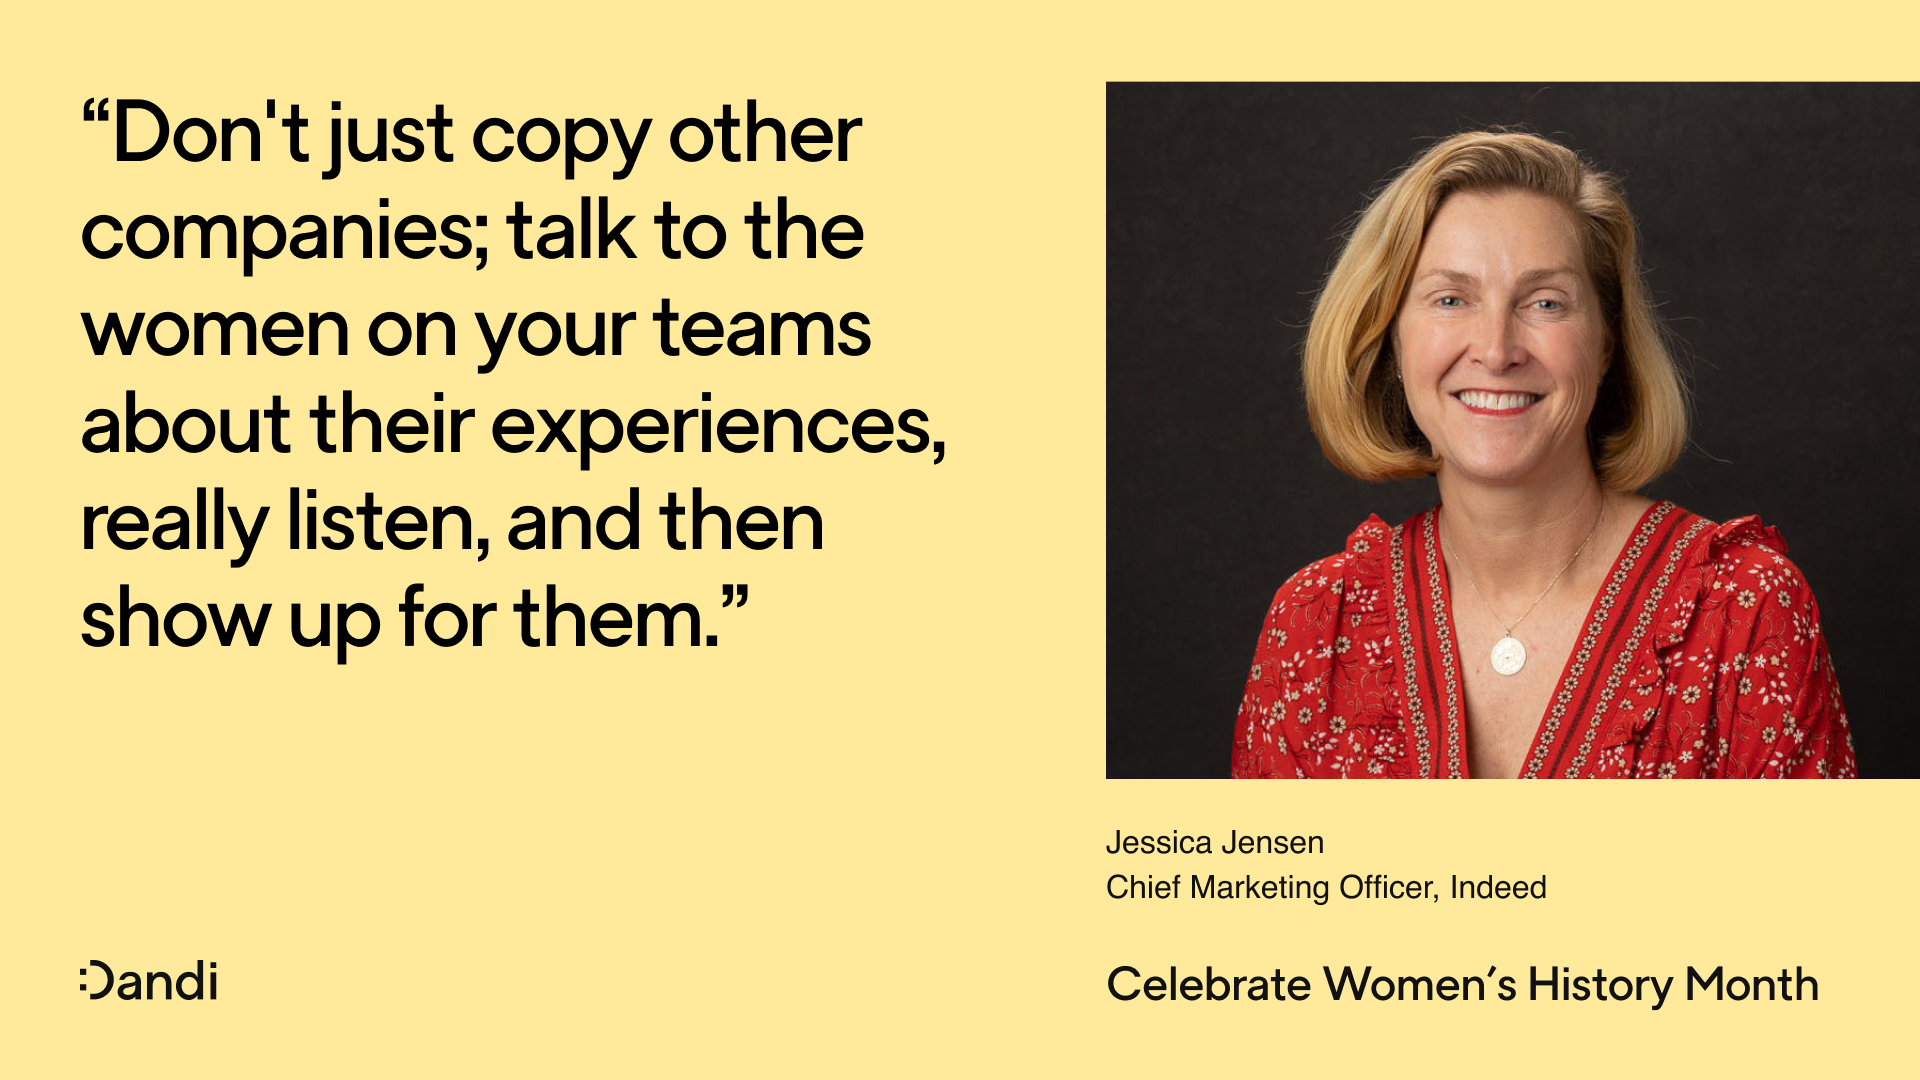 Headshot of Jessica Jensen, smiling. Beneath her name reads: Chief Marketing Officer, Indeed. To the left is a quote that reads: Don't just copy other companies; talk to the women on your teams about their experiences, really listen, and then show up for them. In the bottom right corner reads: Celebrate Women's History Month. The Dandi smiley logo is in the bottom left corner.